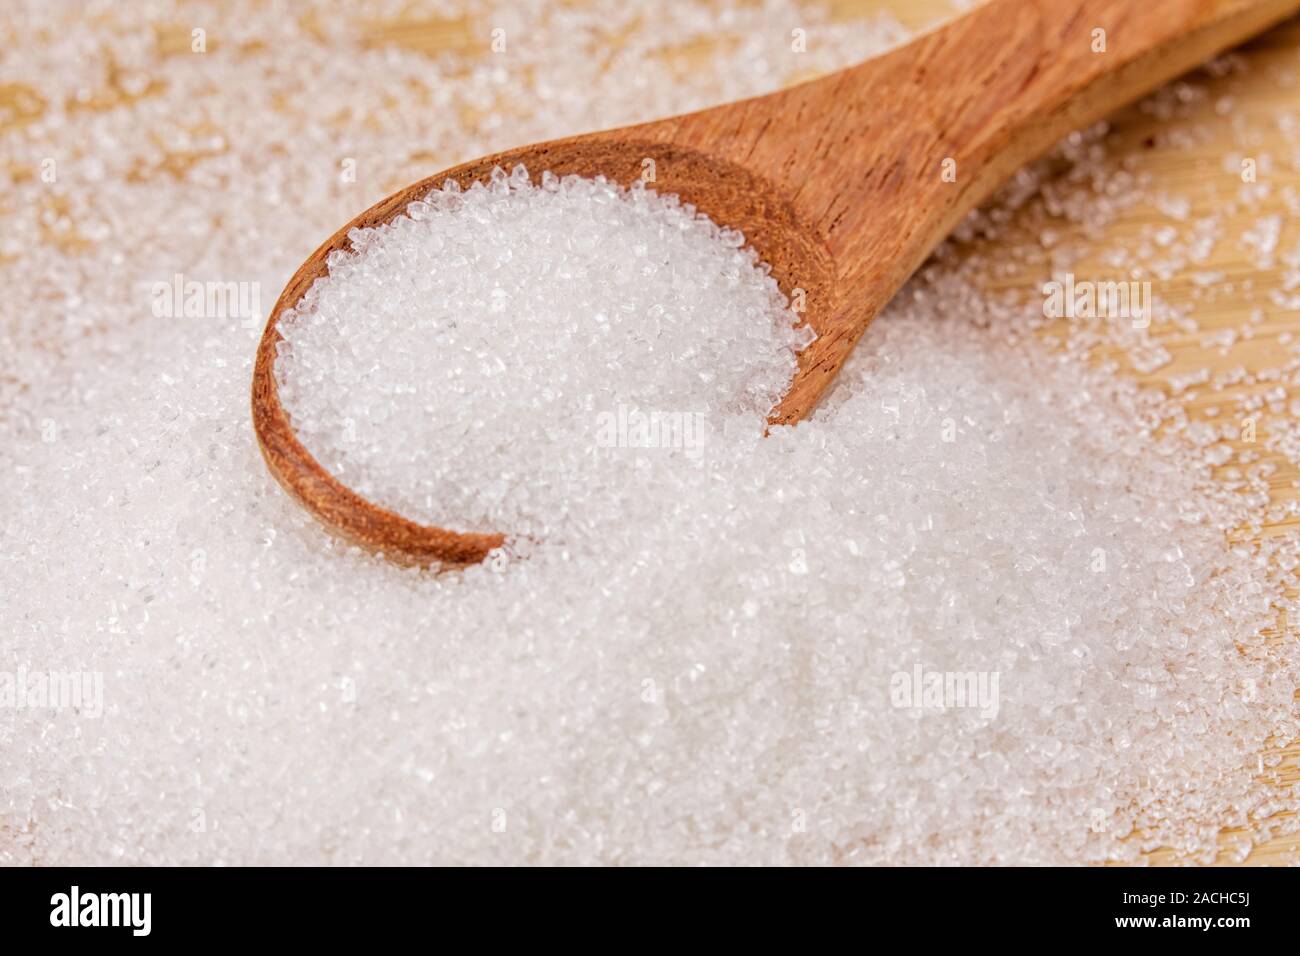 Wooden spoon full of sweet granulated sugar on a wooden background Stock Photo